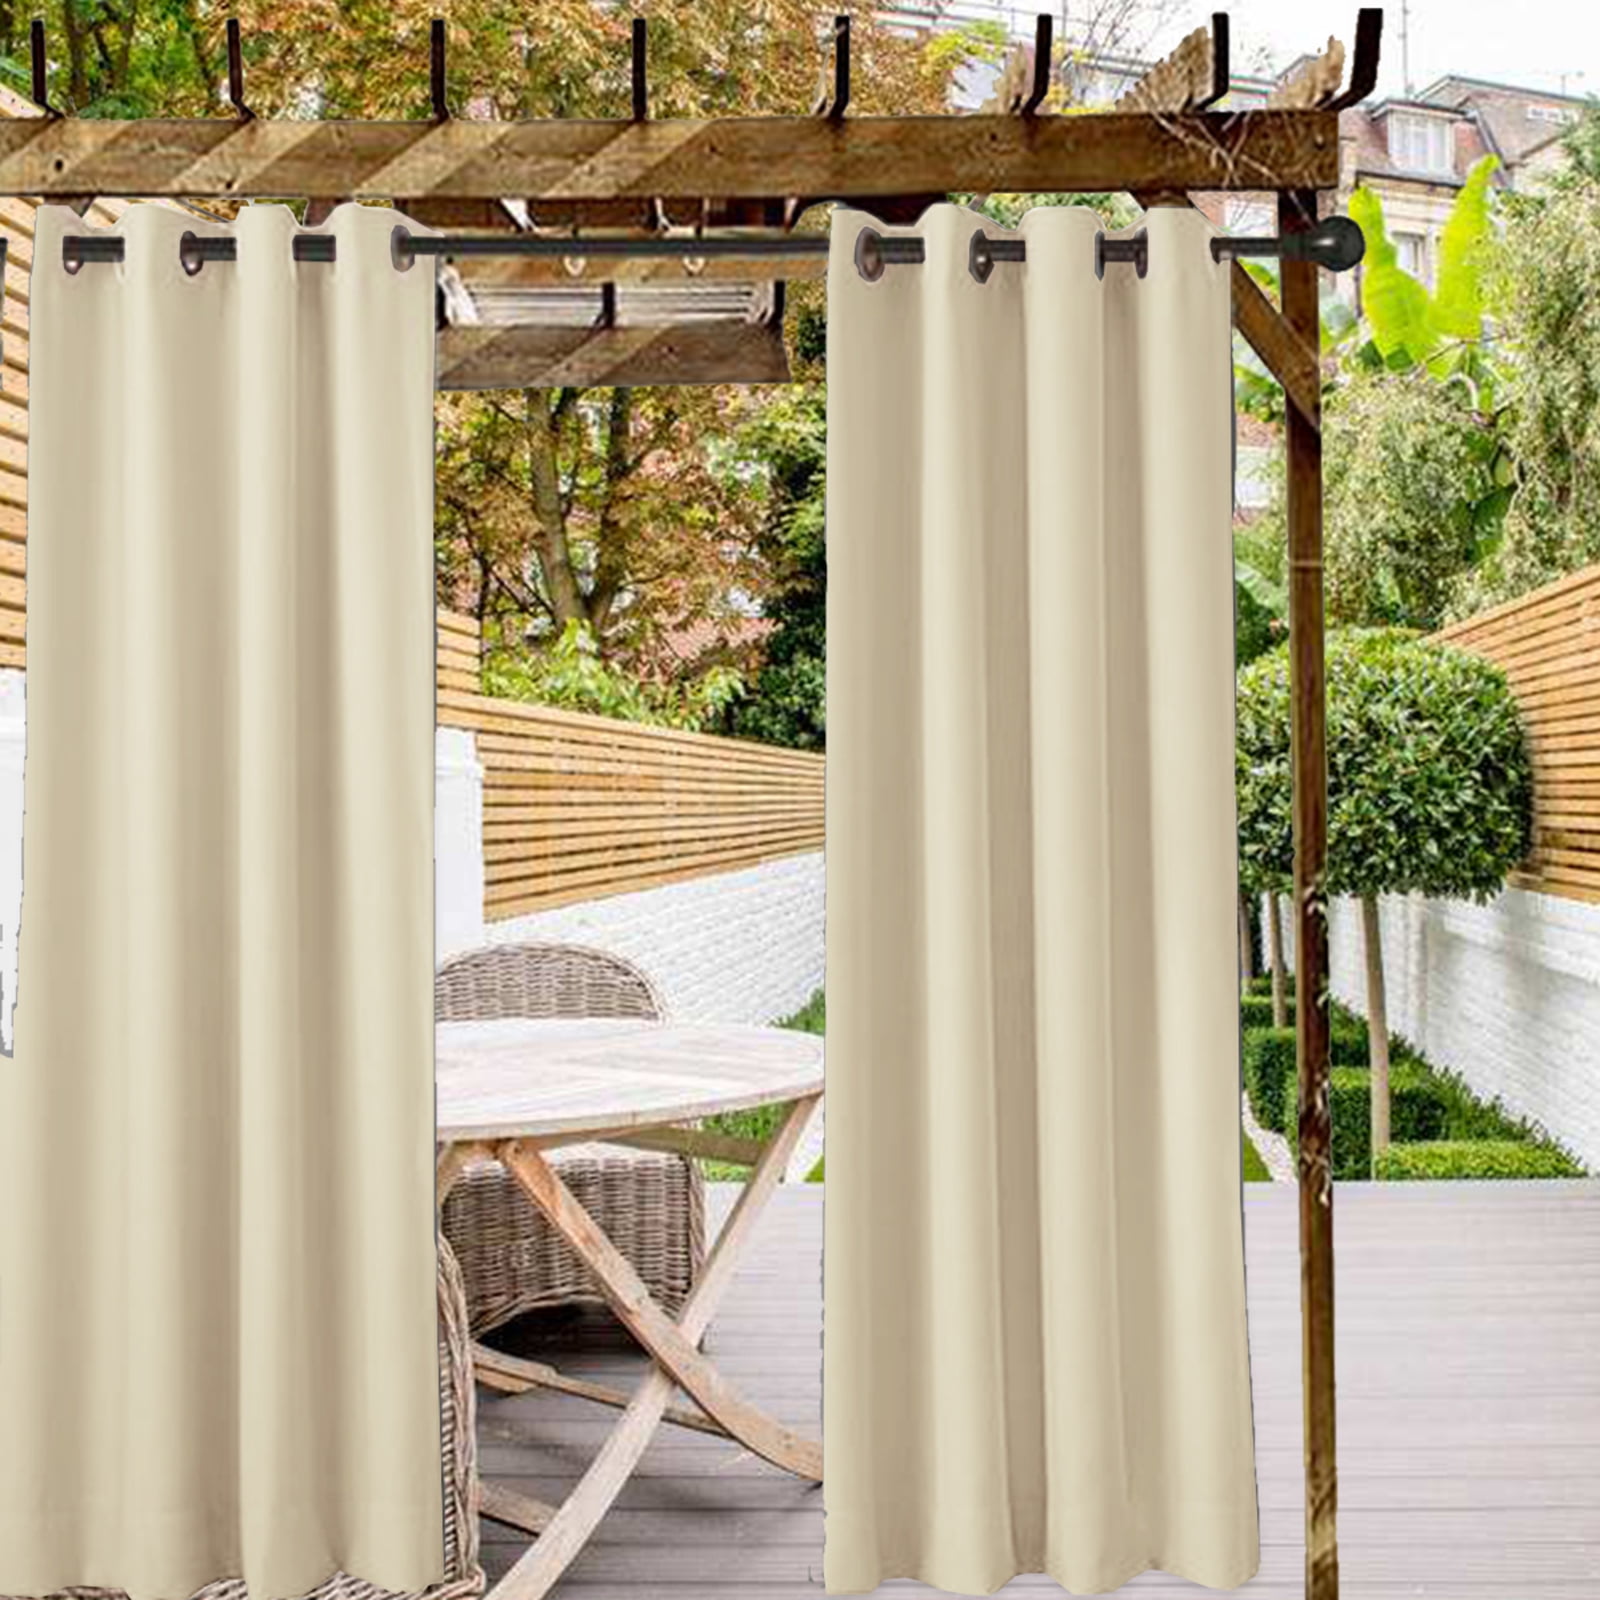 UV Protectant Indoor Outdoor Waterproof Curtains Panel 50x120-Inch For Courtyard 